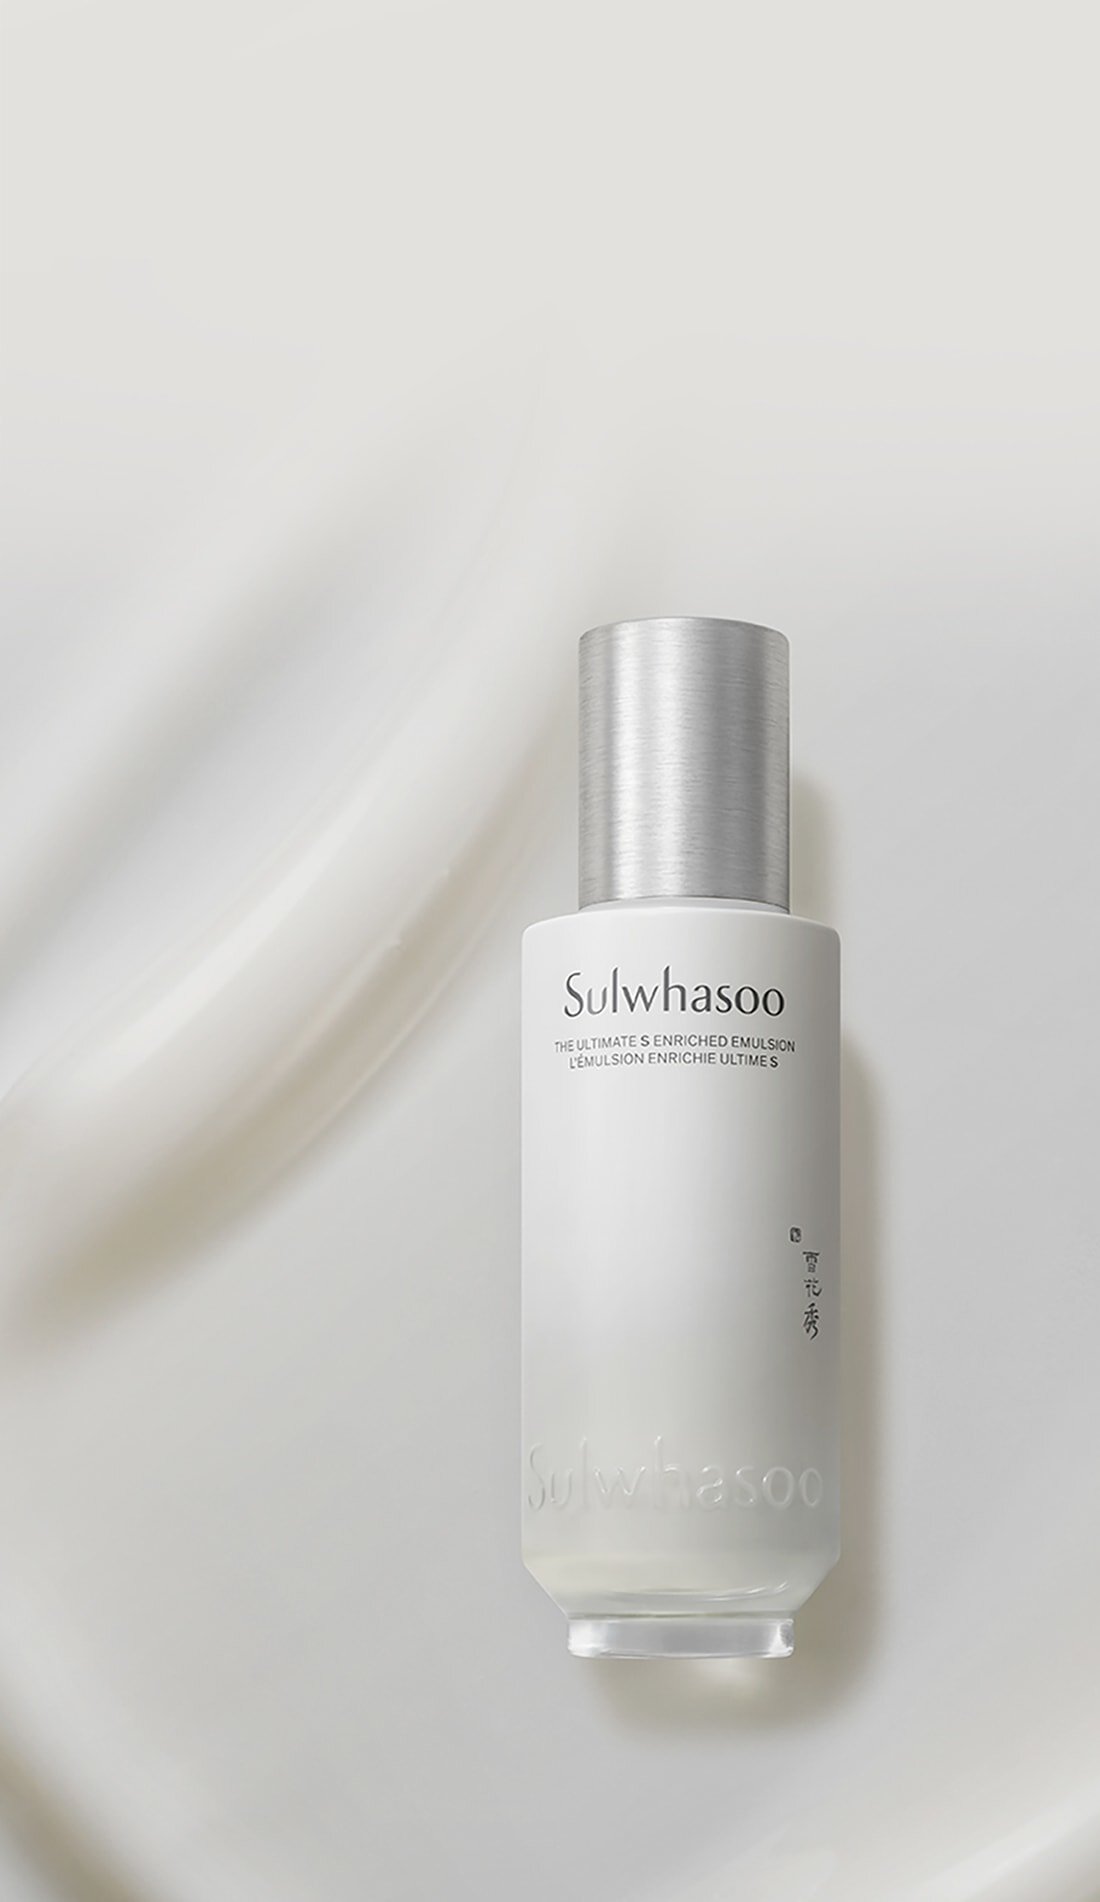 Sulwhasoo THE ULTIMATE S ENRICHED EMULSION